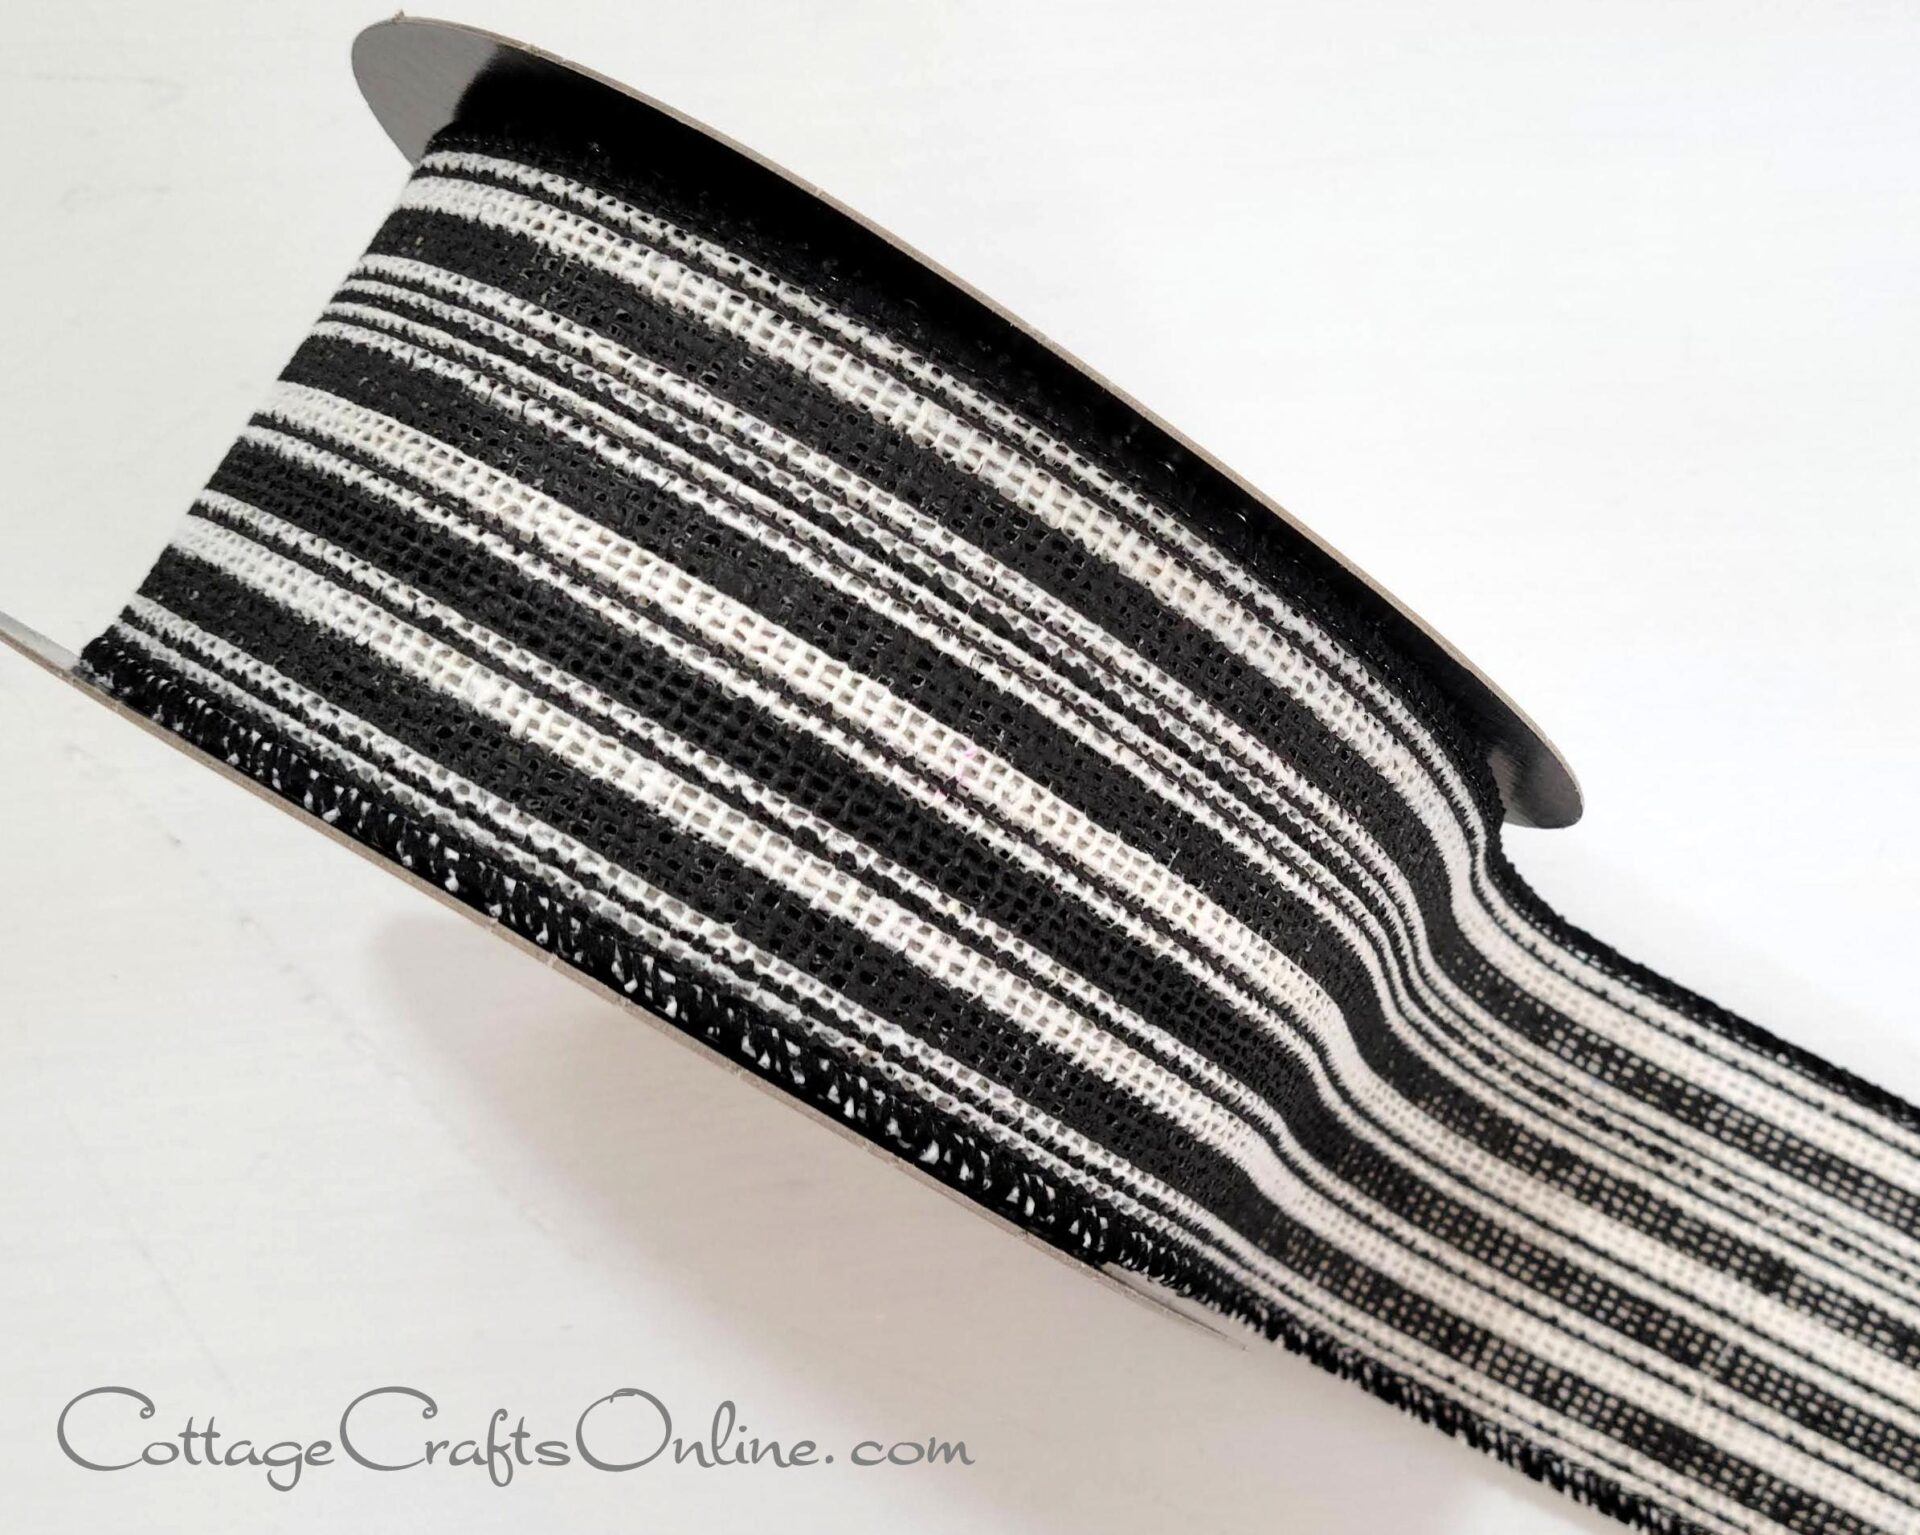 New fall ribbon with black and white stripes.